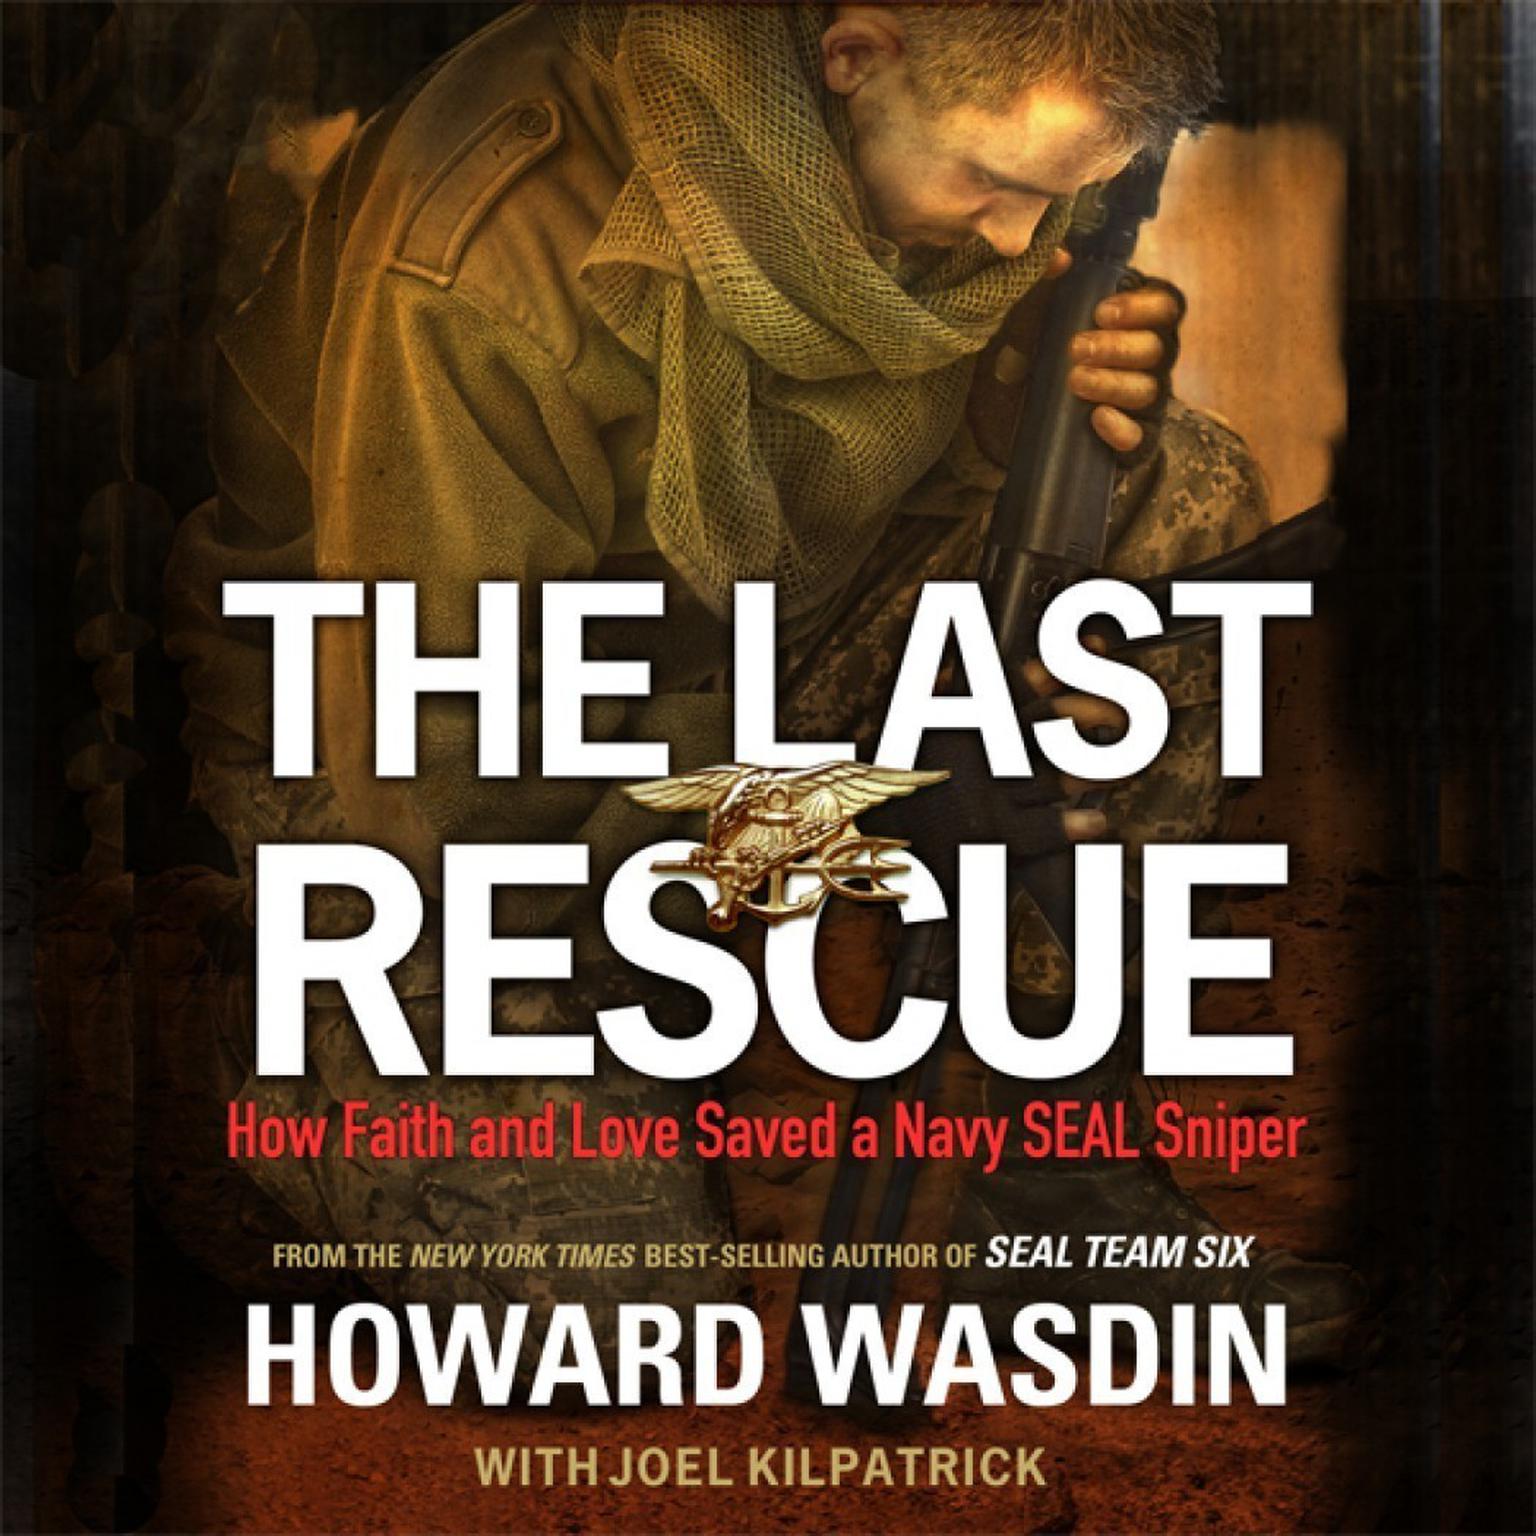 The Last Rescue: How Faith and Love Saved a Navy SEAL Sniper Audiobook, by Howard Wasdin